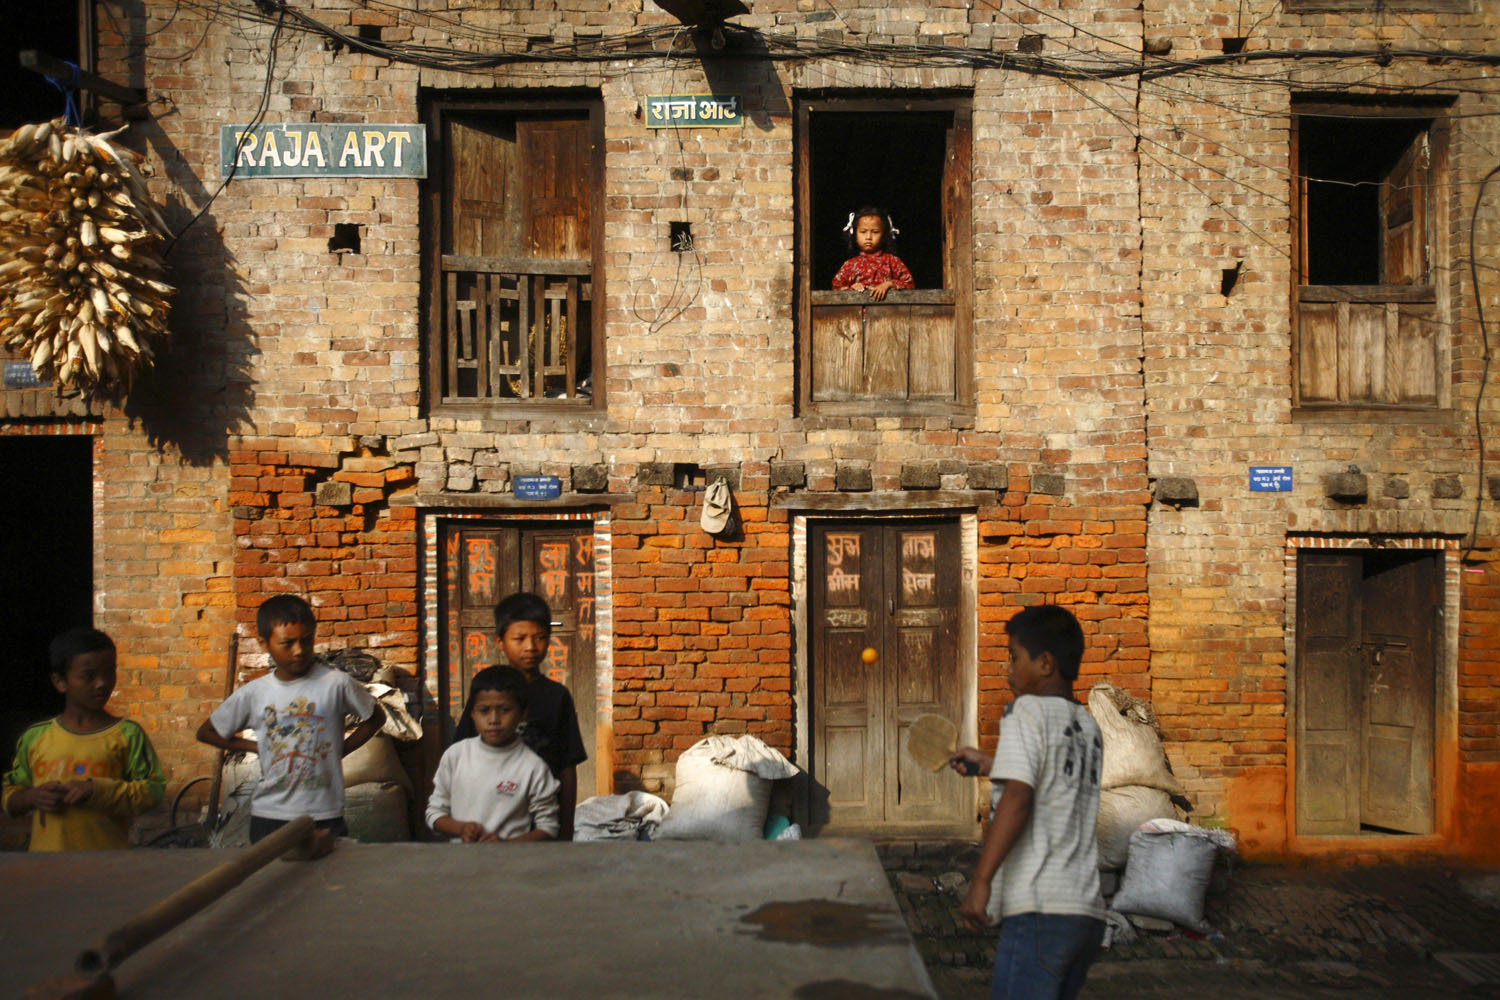 Oct. 8, 2012. A girl looks out from the window of her home as children play ping-pong outside in the ancient Nepalese city of Bhaktapur.